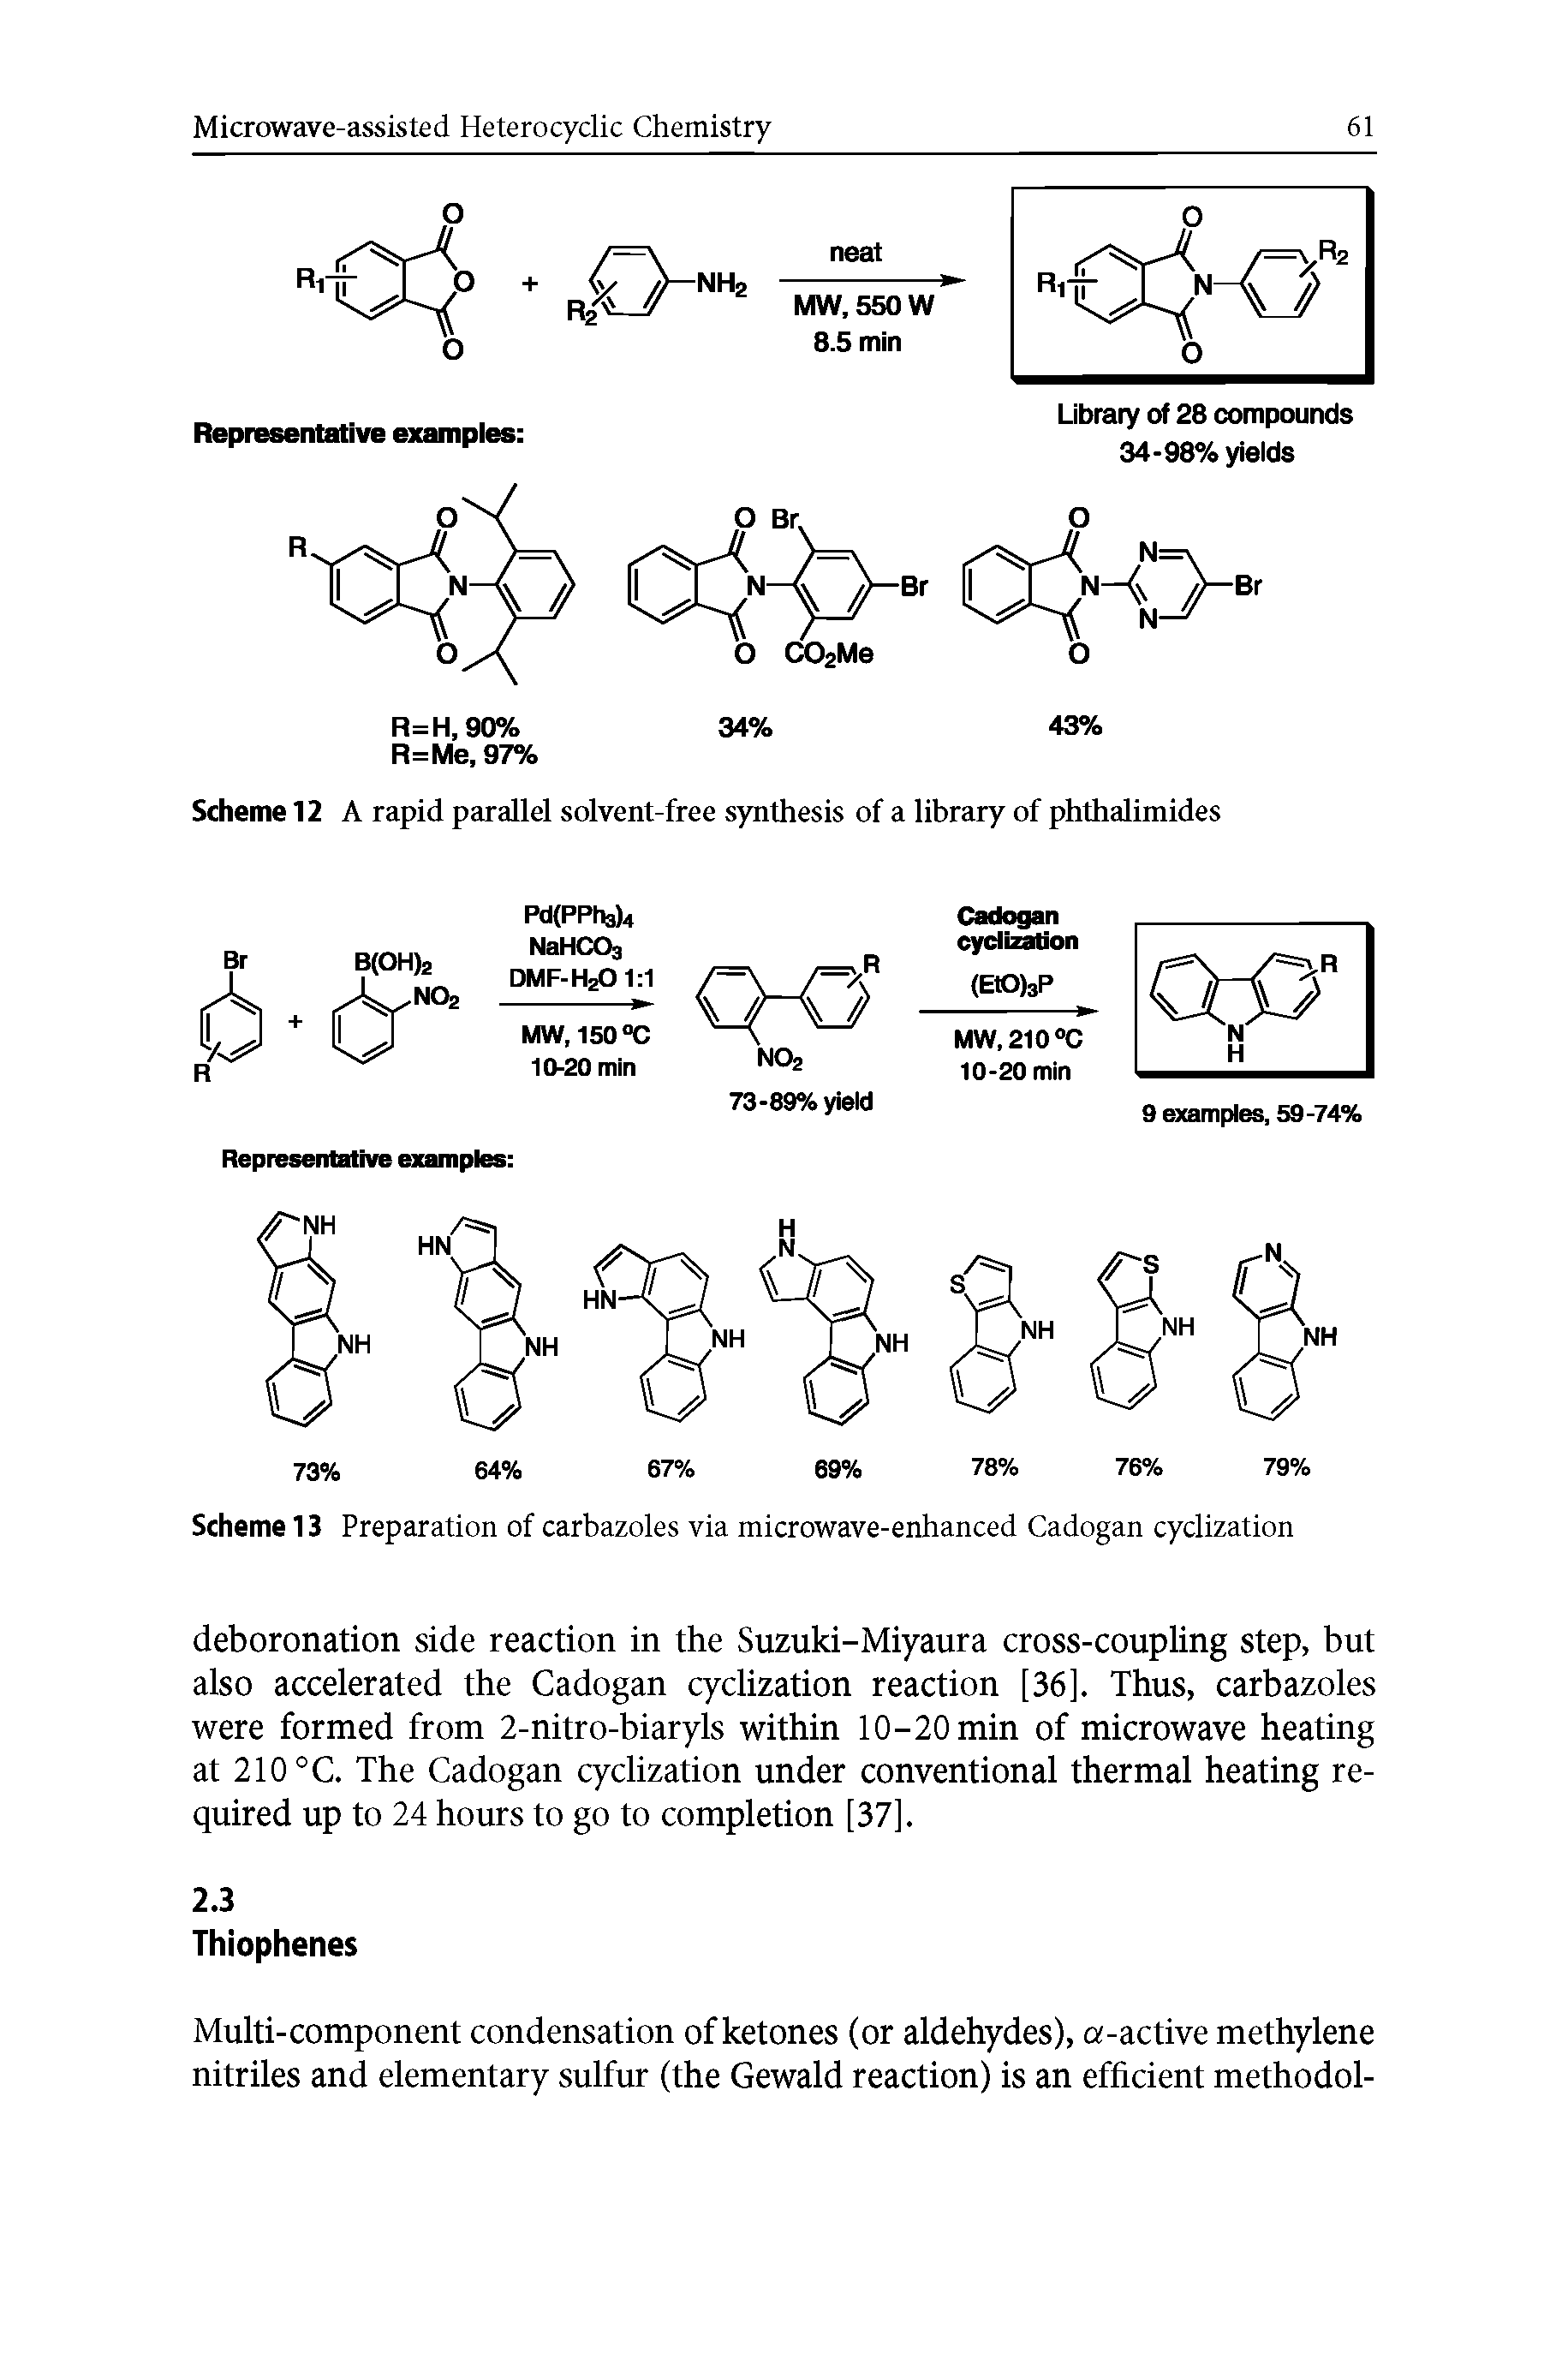 Scheme 12 A rapid parallel solvent-free synthesis of a library of phthalimides...